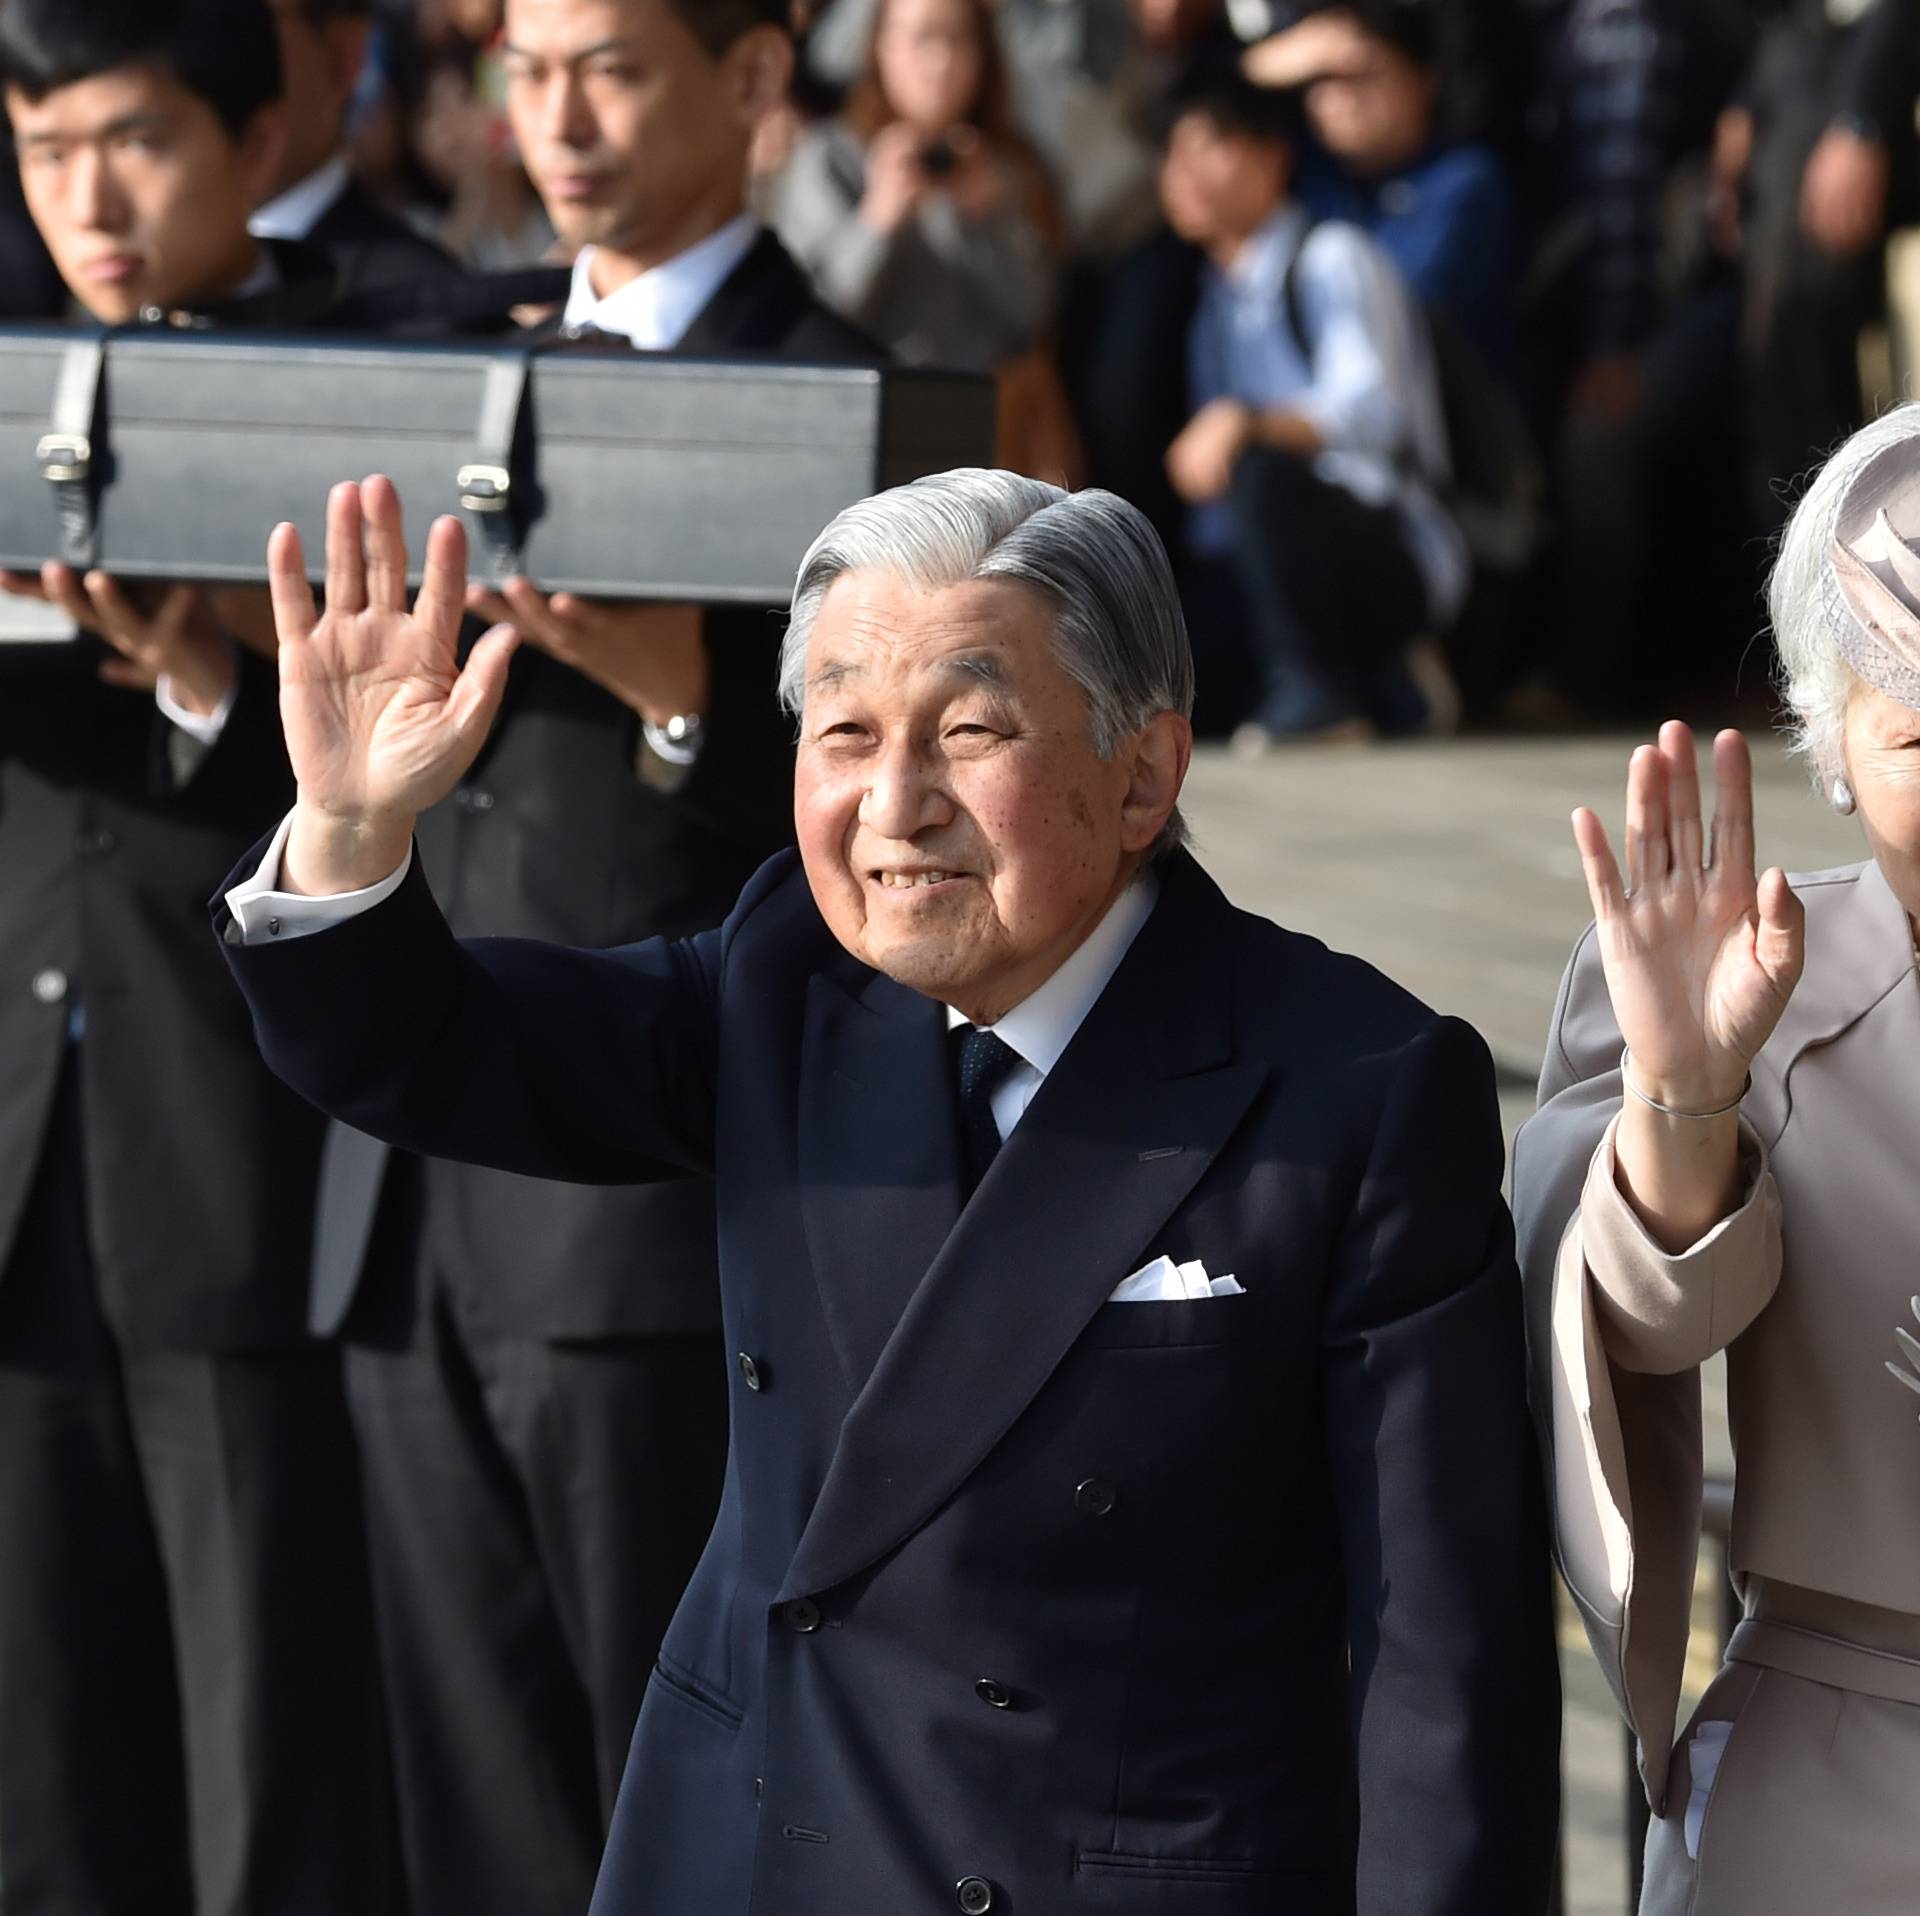 Japan's Emperor Akihito, accompanied by Empress Michiko, waves to well-wishers before leaving Ujiyamada Station after their visit to Ise Jingu shrine in Ise, Japan